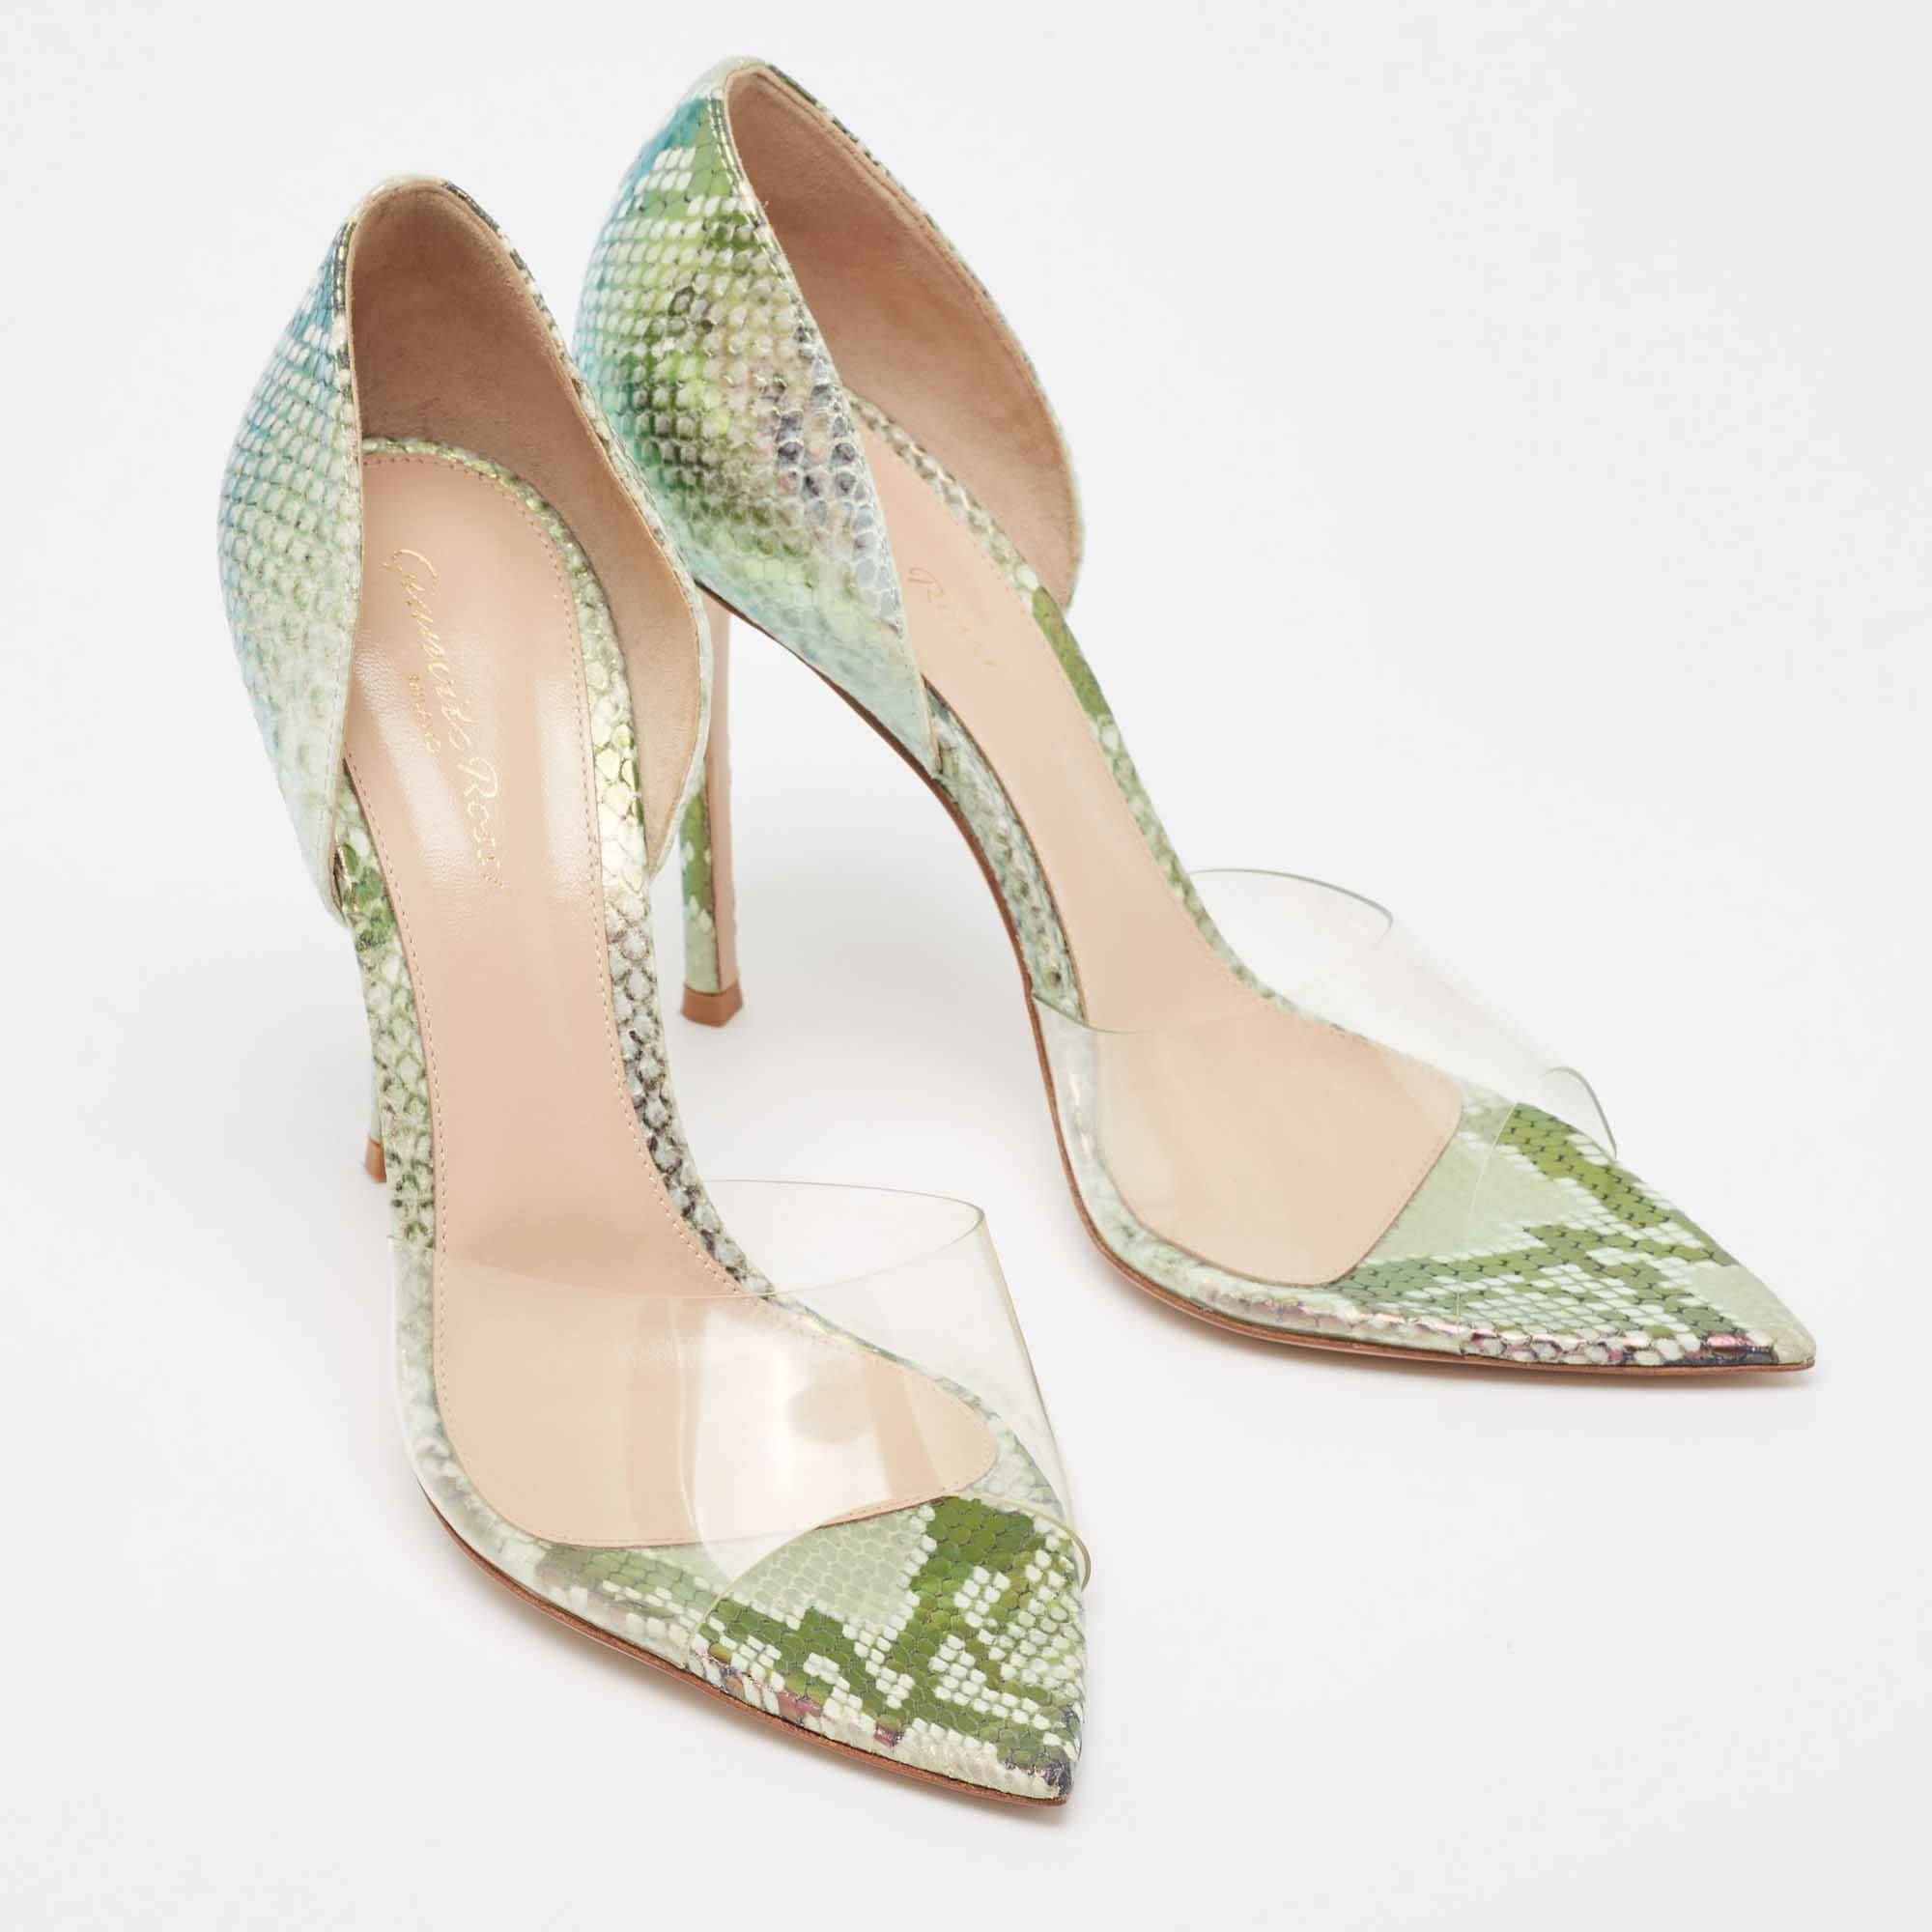 Gianvito Rossi Metallic Embossed Snakeskin and PVC Bree Pumps Size 40.5 For Sale 4